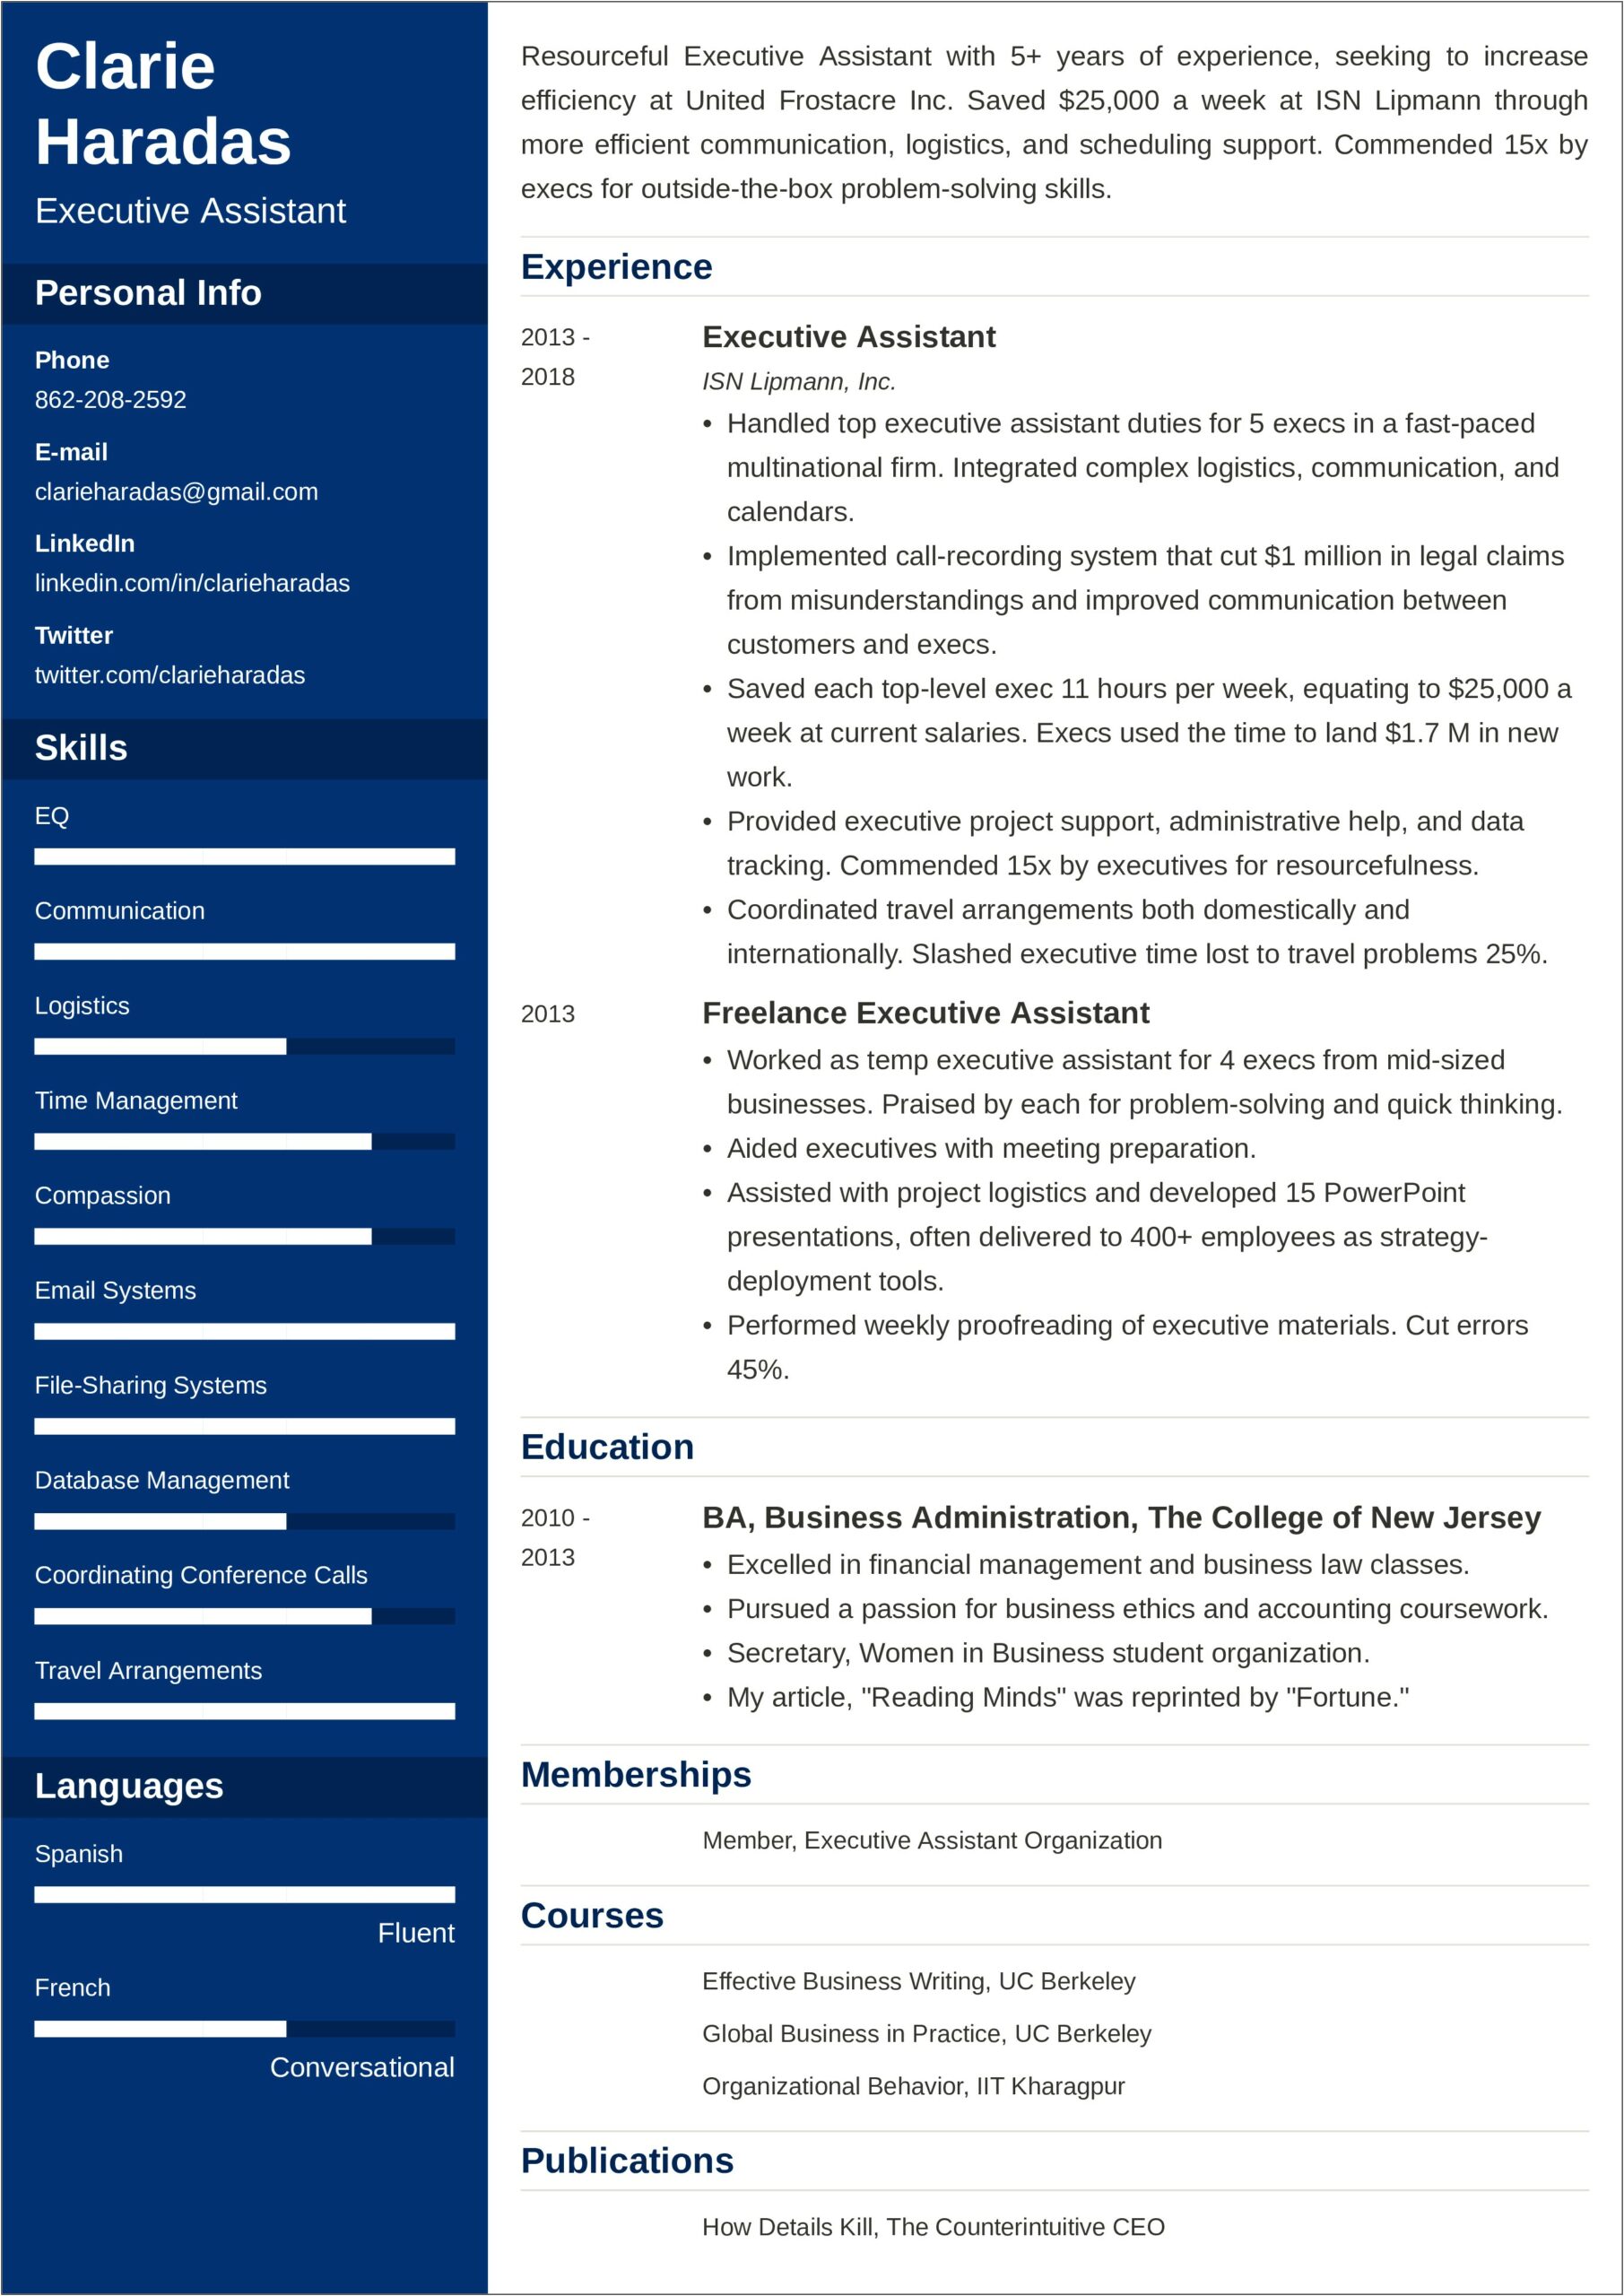 Resume Design A Good Thing Or Bad Thing